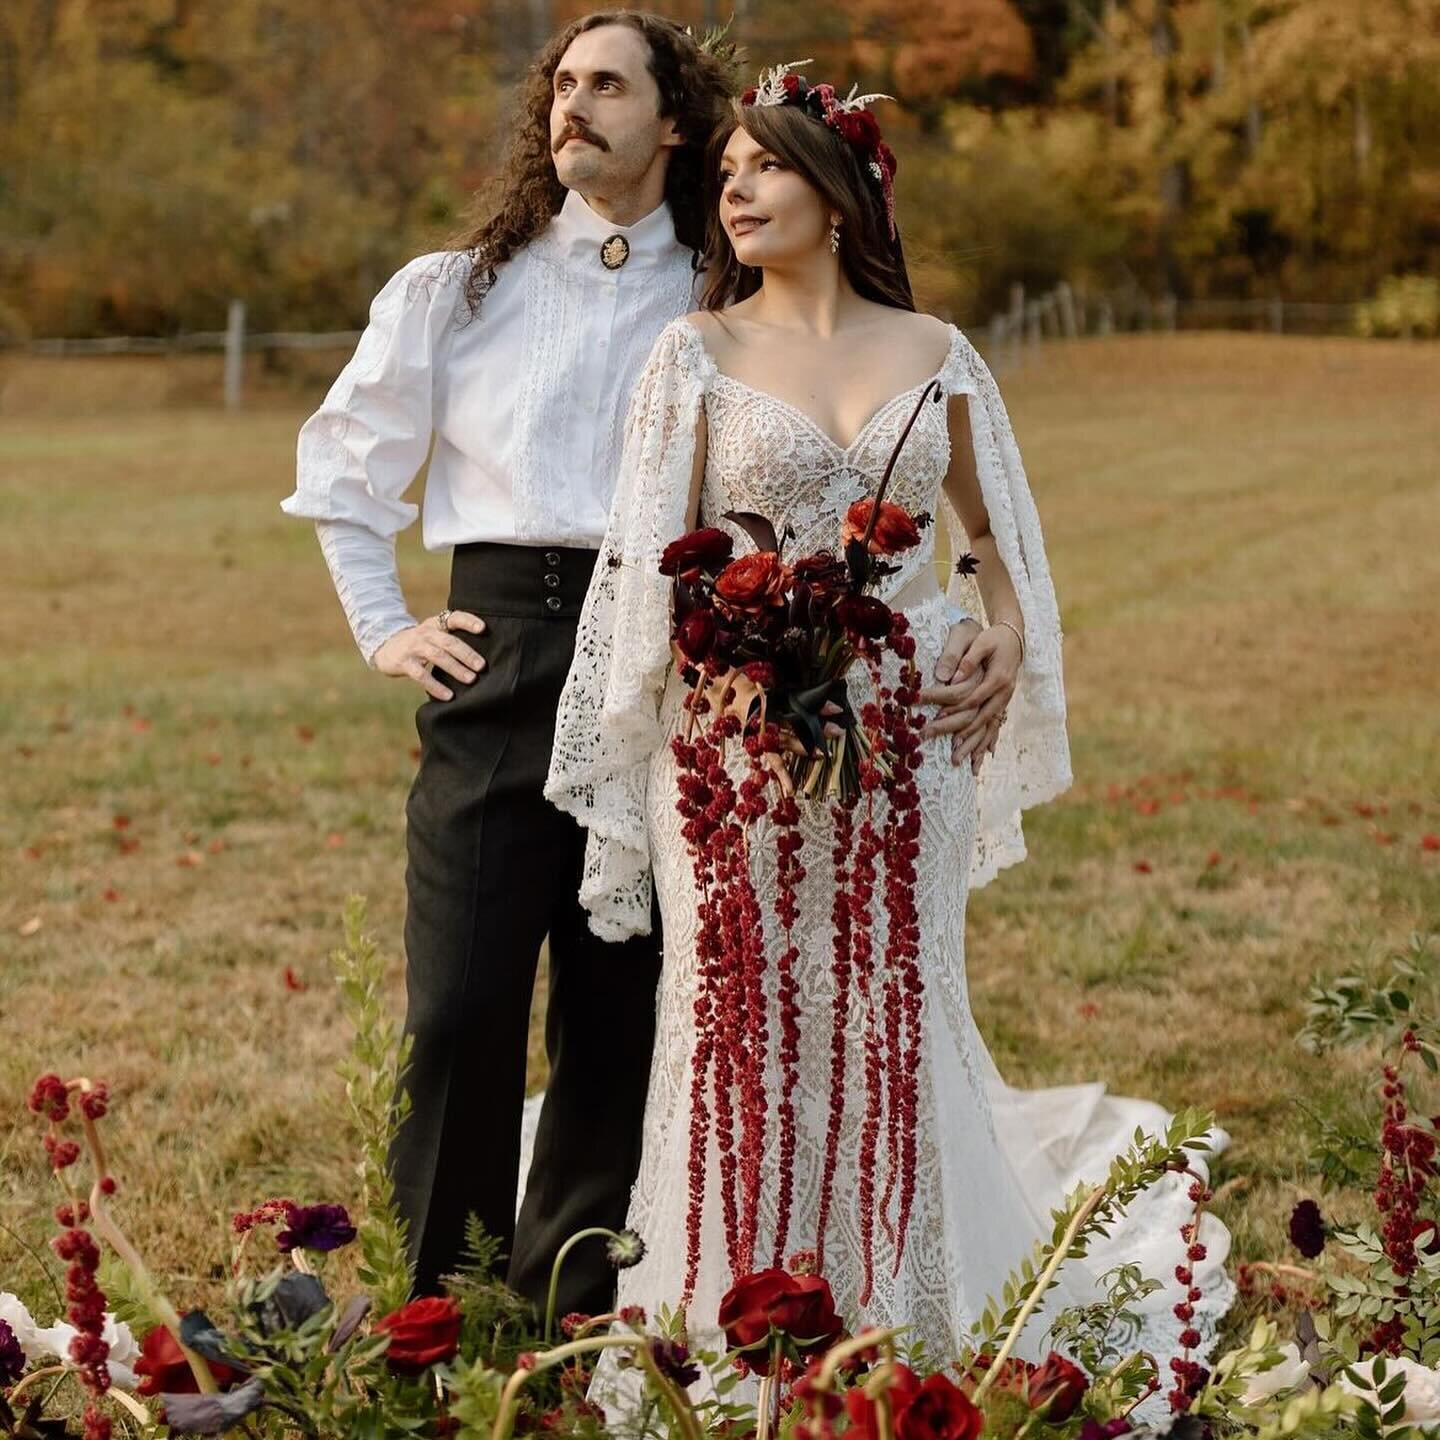 Search results for &ldquo;edgy Victorian autumn forest wedding&rdquo;: real #wildflowerbride @dr.lizlistens highly curated, beautiful, and unique special day 🍁 ✨🔥
Photos @foxhousestudio 
Venue @laughingwatersnc 
Gown @wildflowerbridal 
Florals @pol